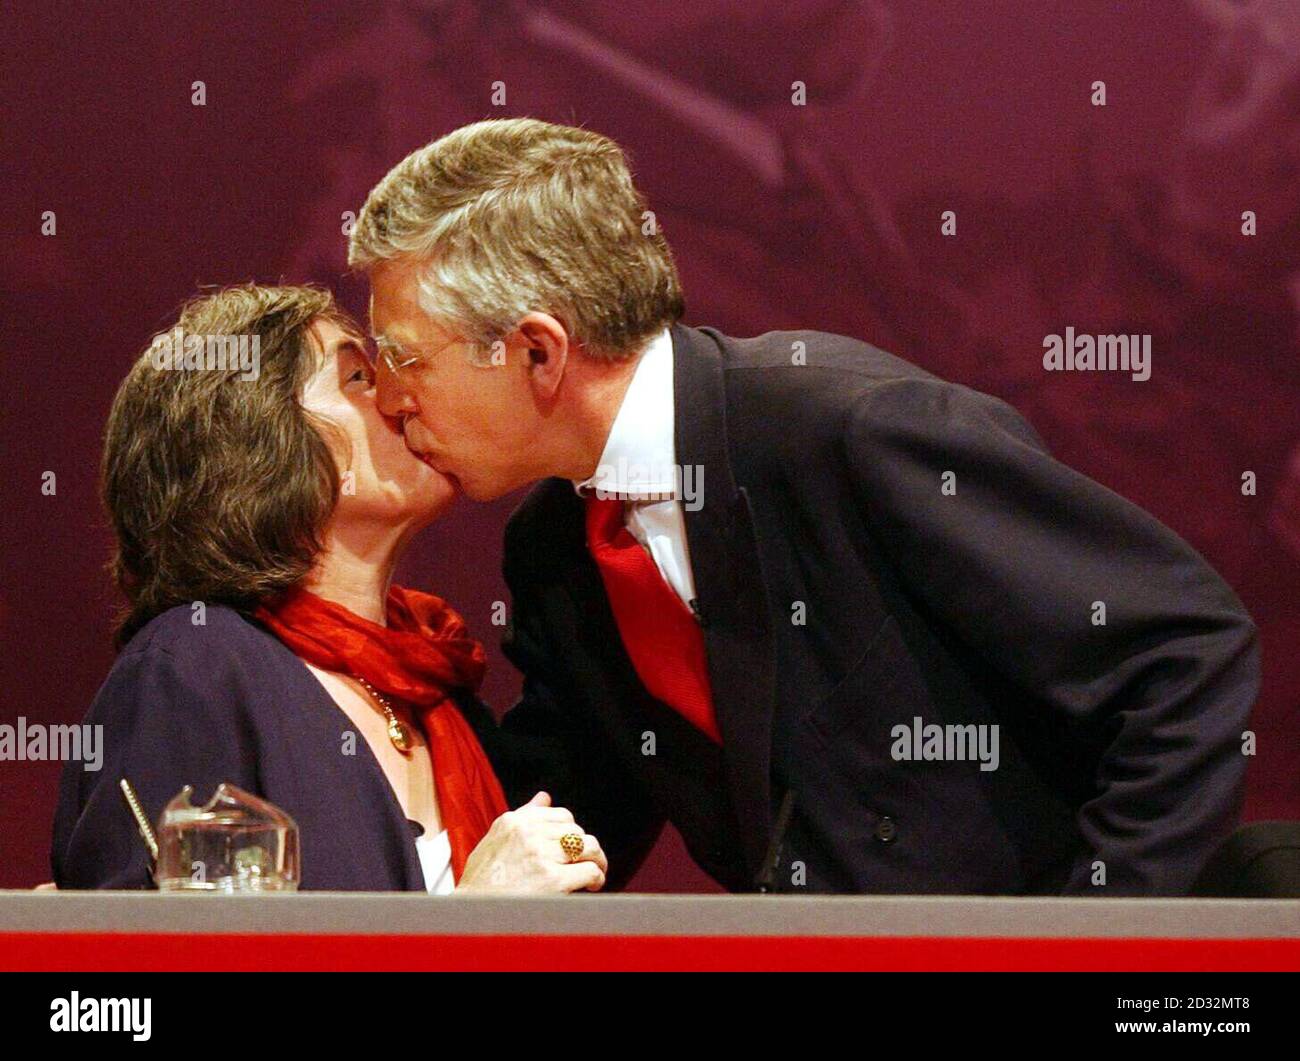 International Development Secretary, Clare Short receives a kiss from Foreign Secretary Jack Straw during the first day of the Labour Party Conference at The Winter Gardens, Blackpool. Stock Photo